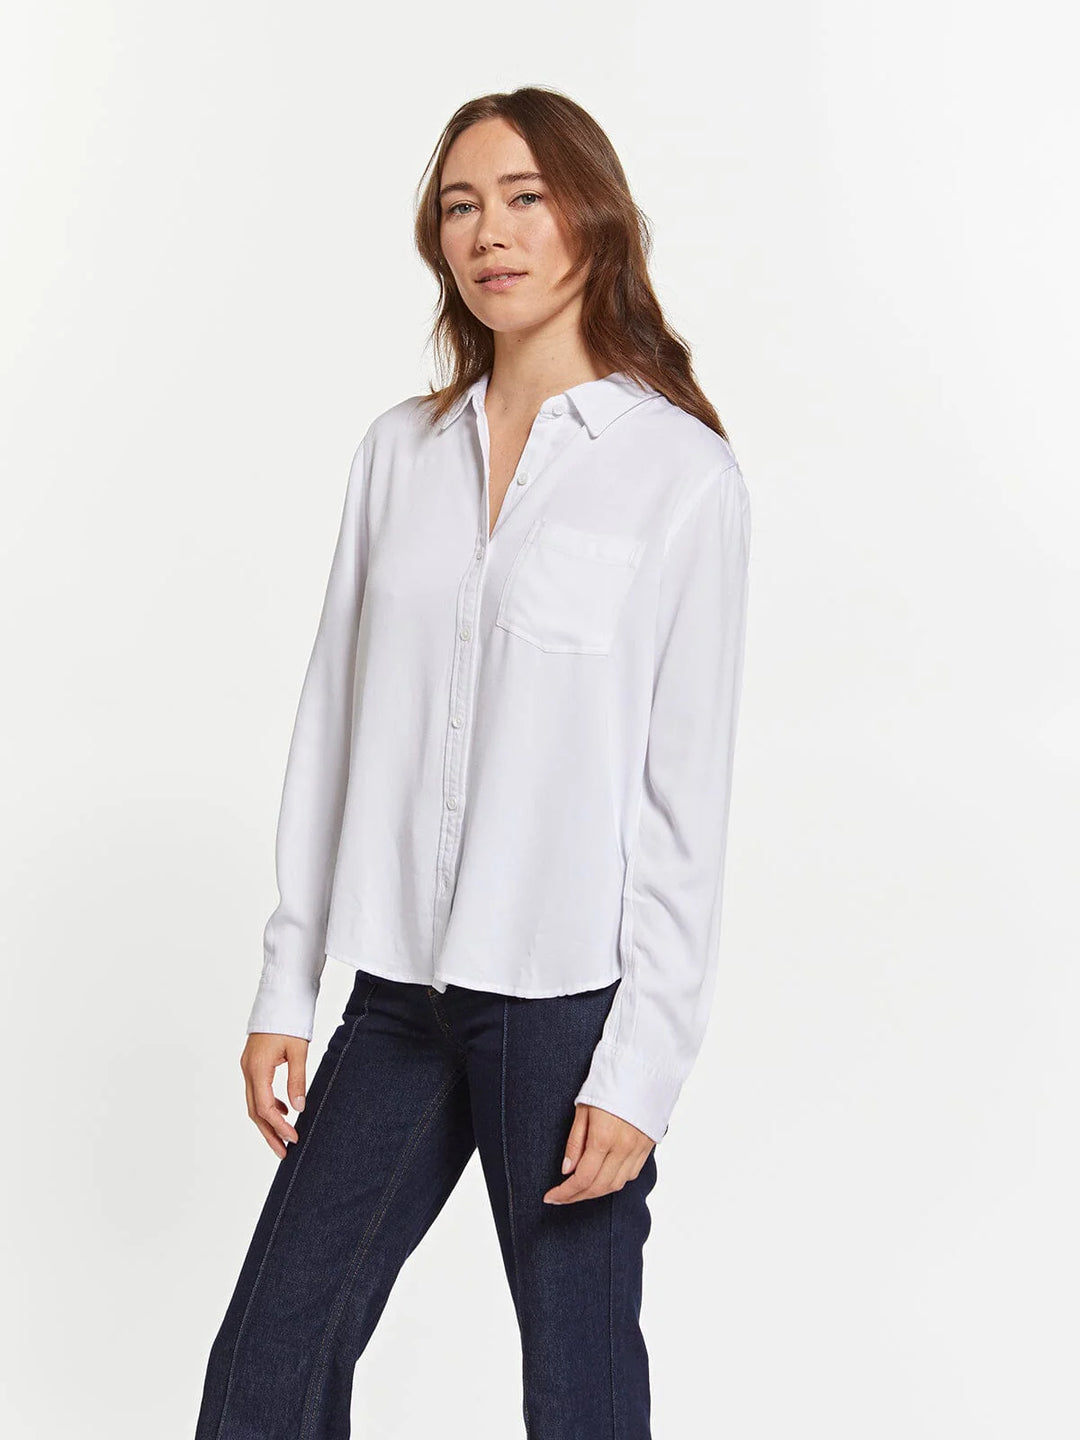 Penny The Classic White Button Down Top - 22 Palms Boutique